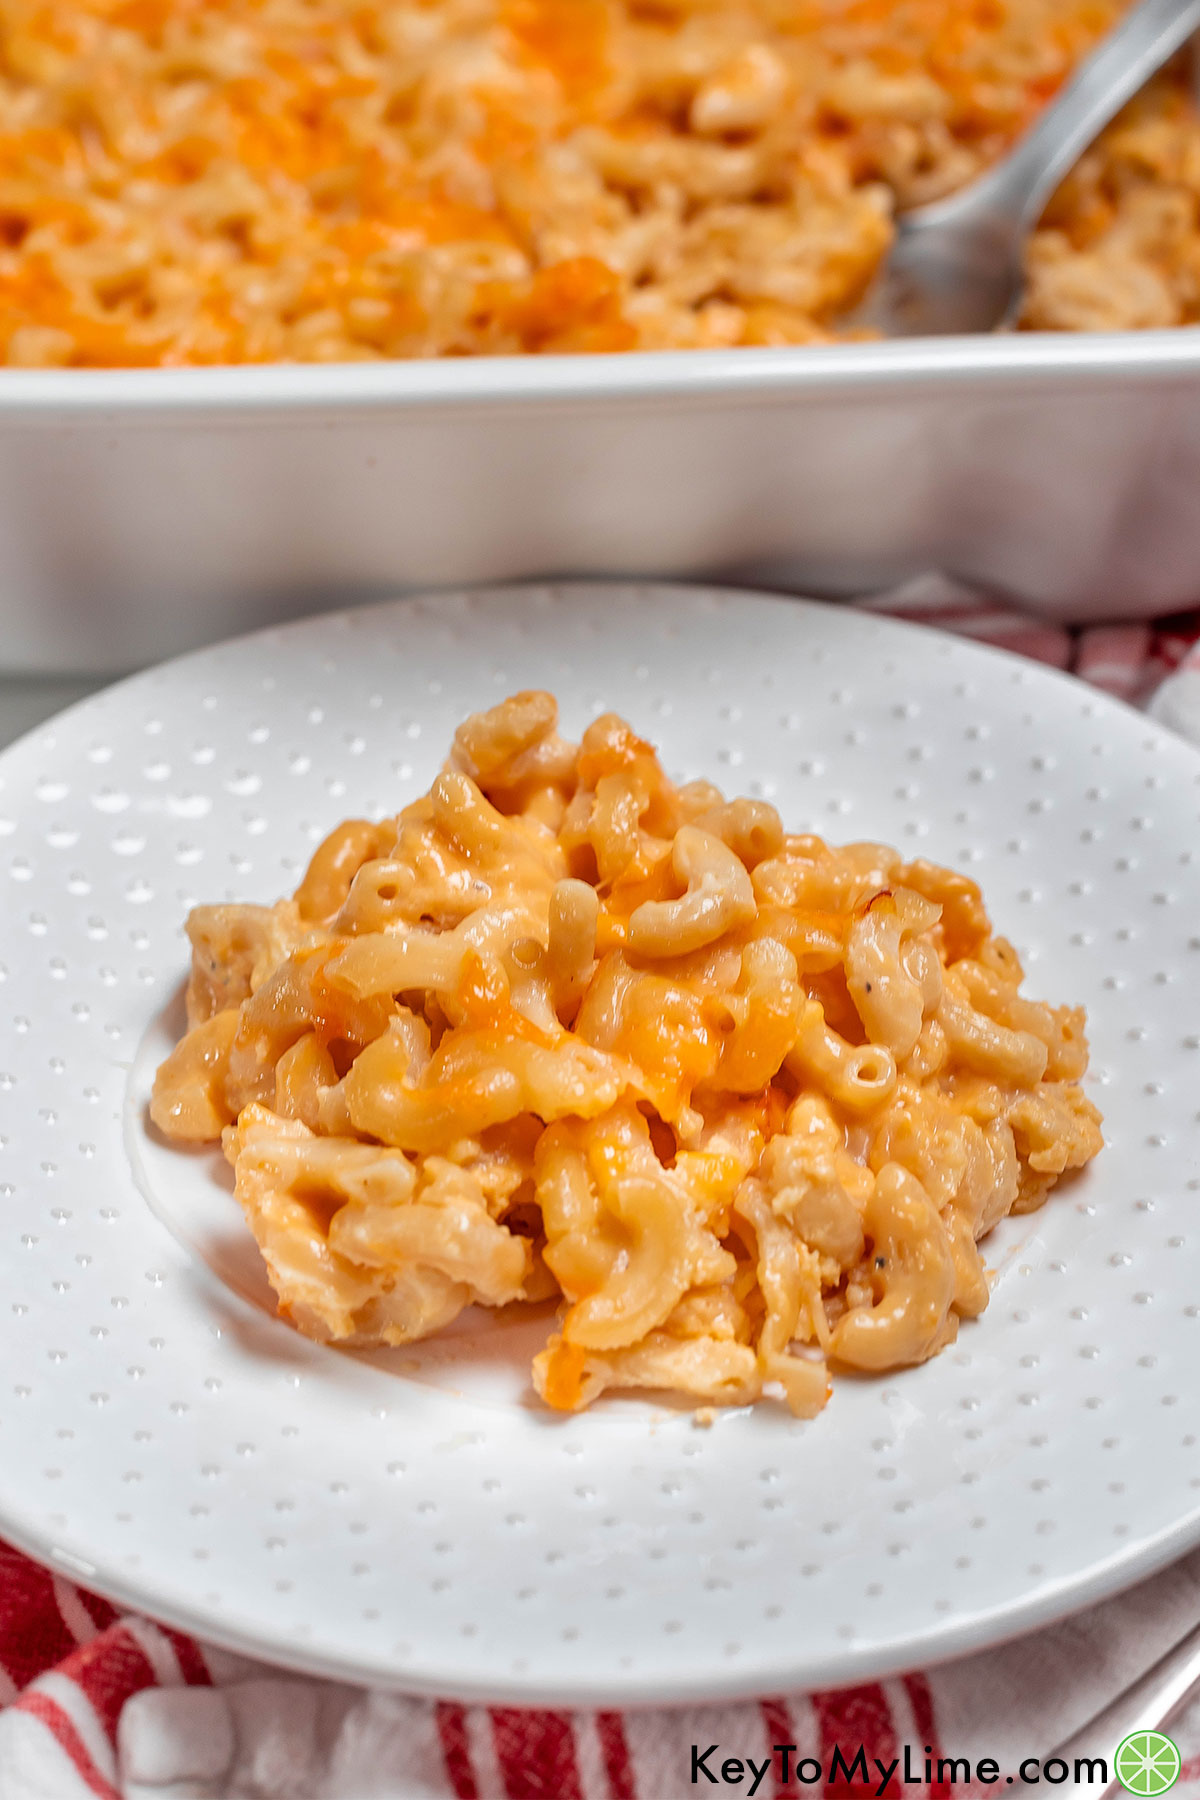 A side image of a serving of creamy mac and cheese on a white plate with a casserole dish in the background.